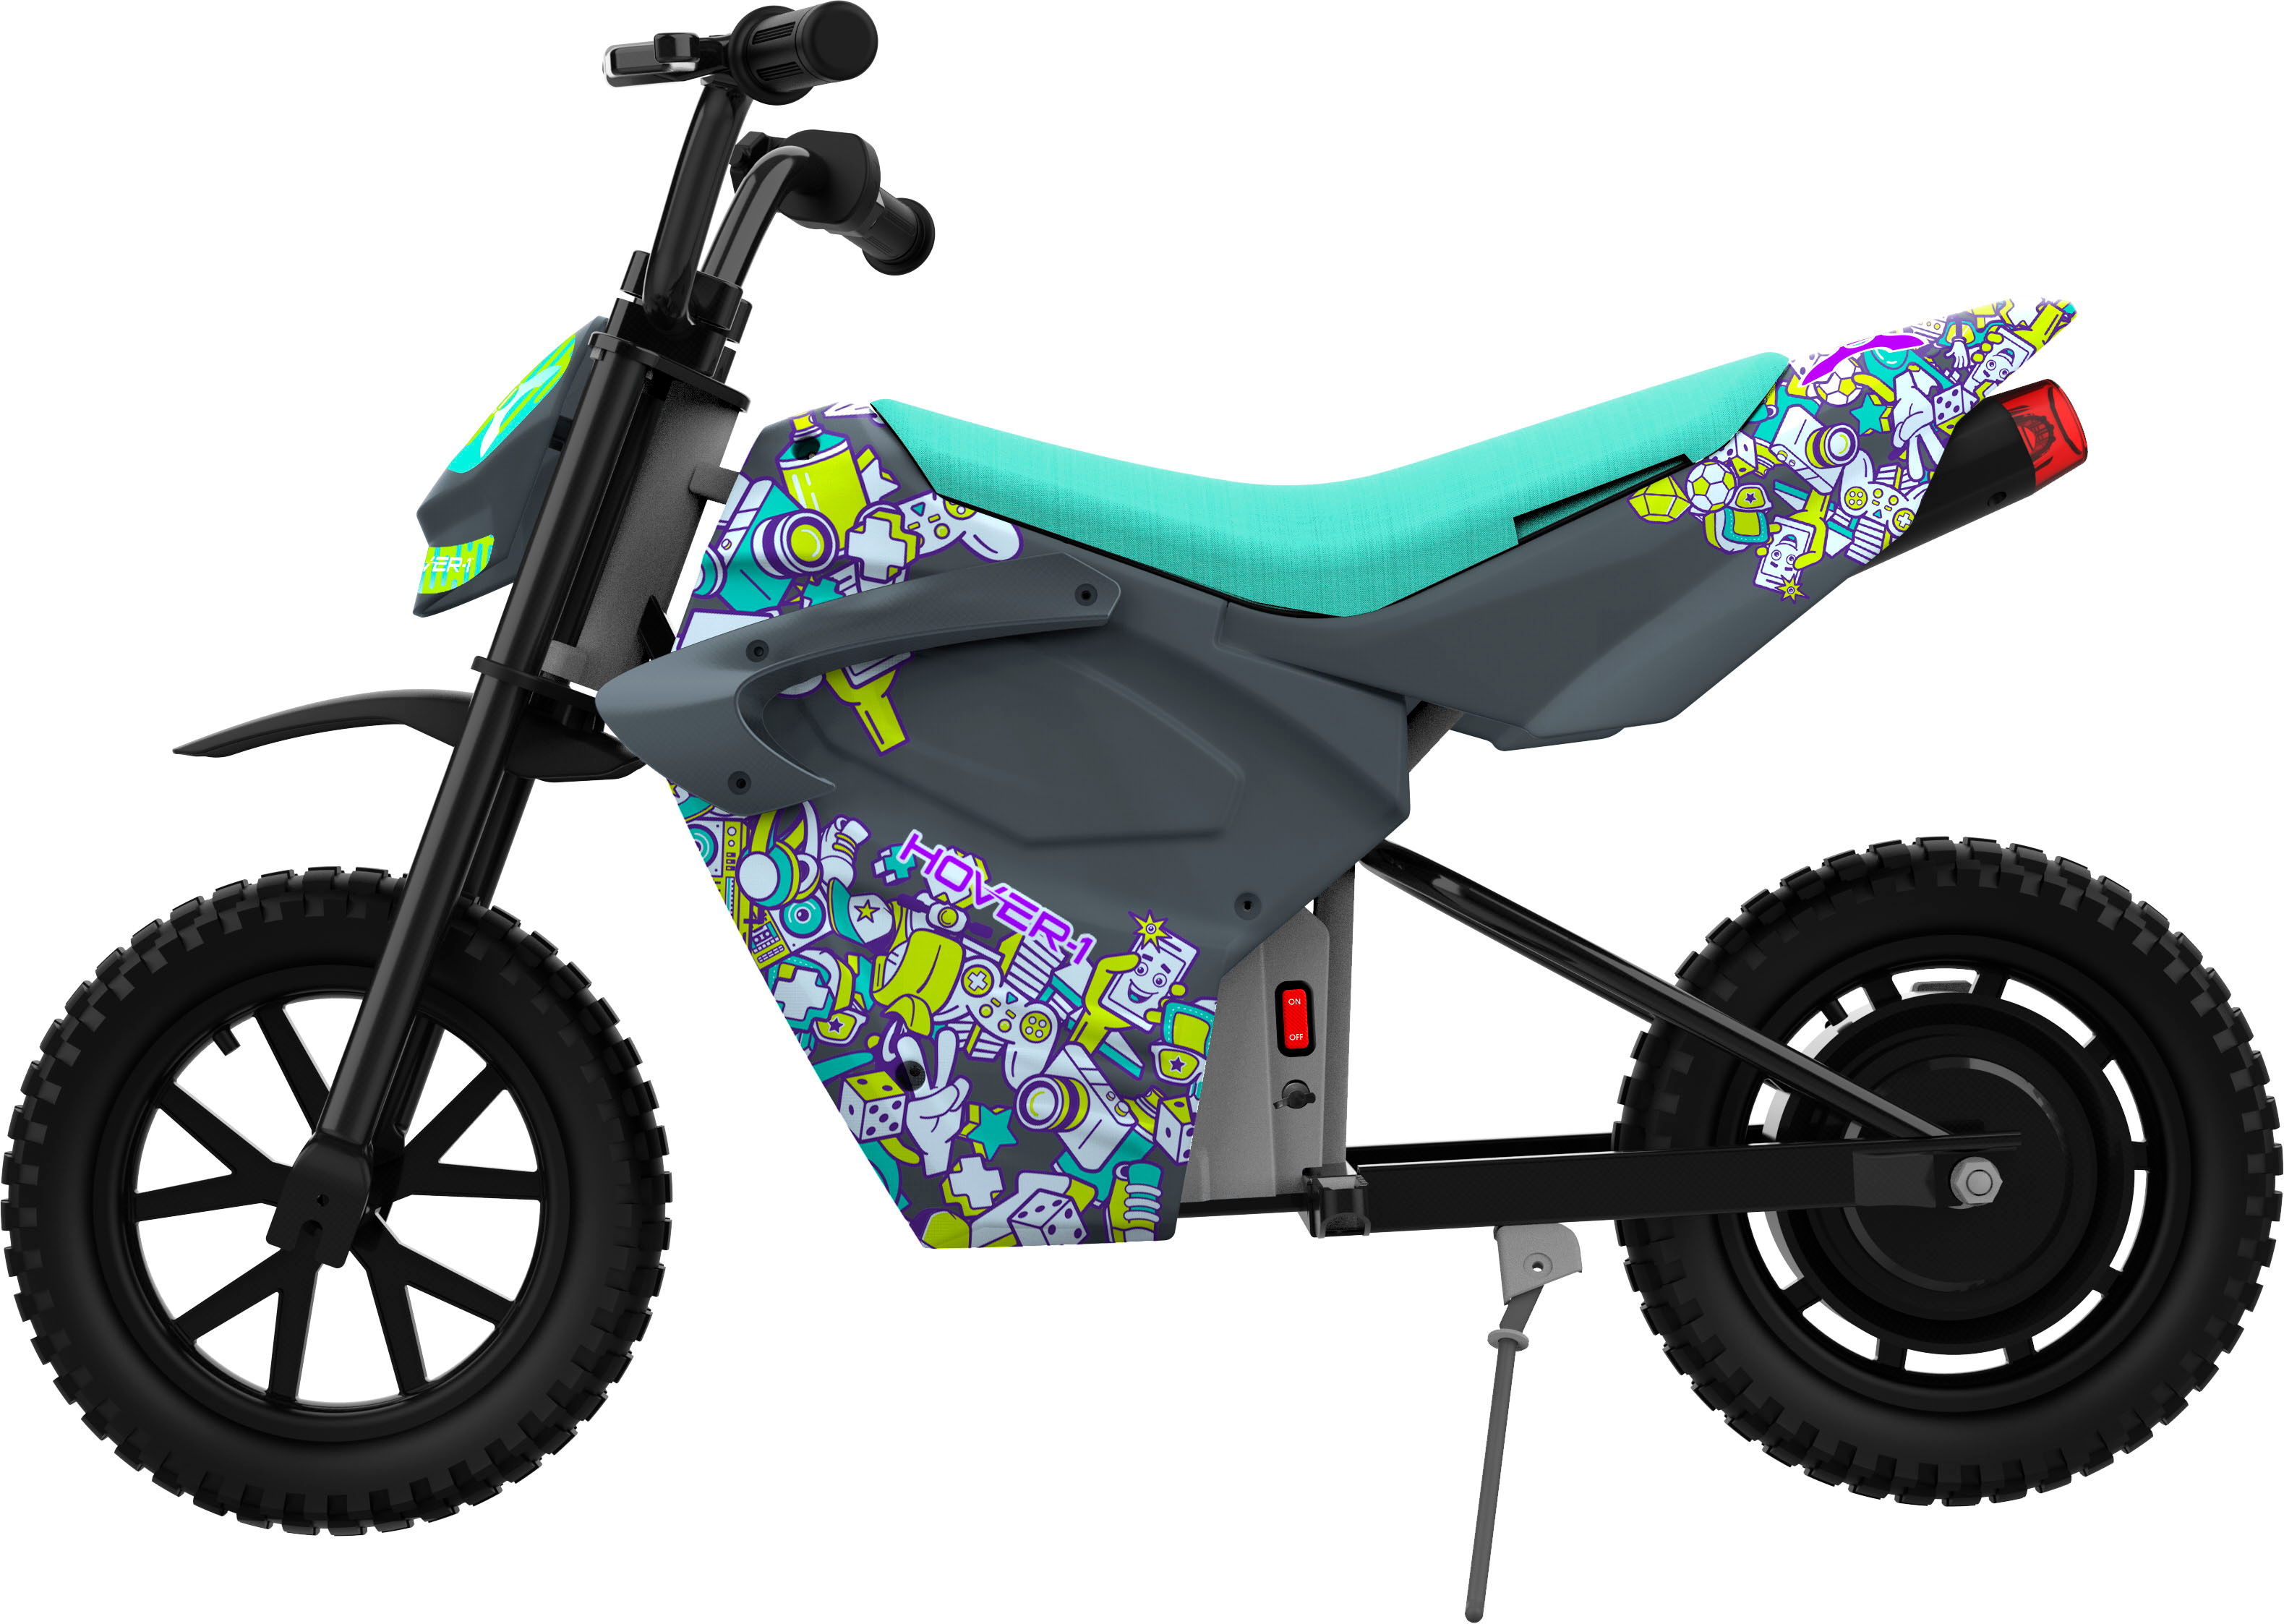 Angle View: Hover-1 - Trak Electric Dirt Bike for Kids, Silent-chainless motor, Lithium-ion Battery, 9 mi Range, 9 mph Max Speed - Black